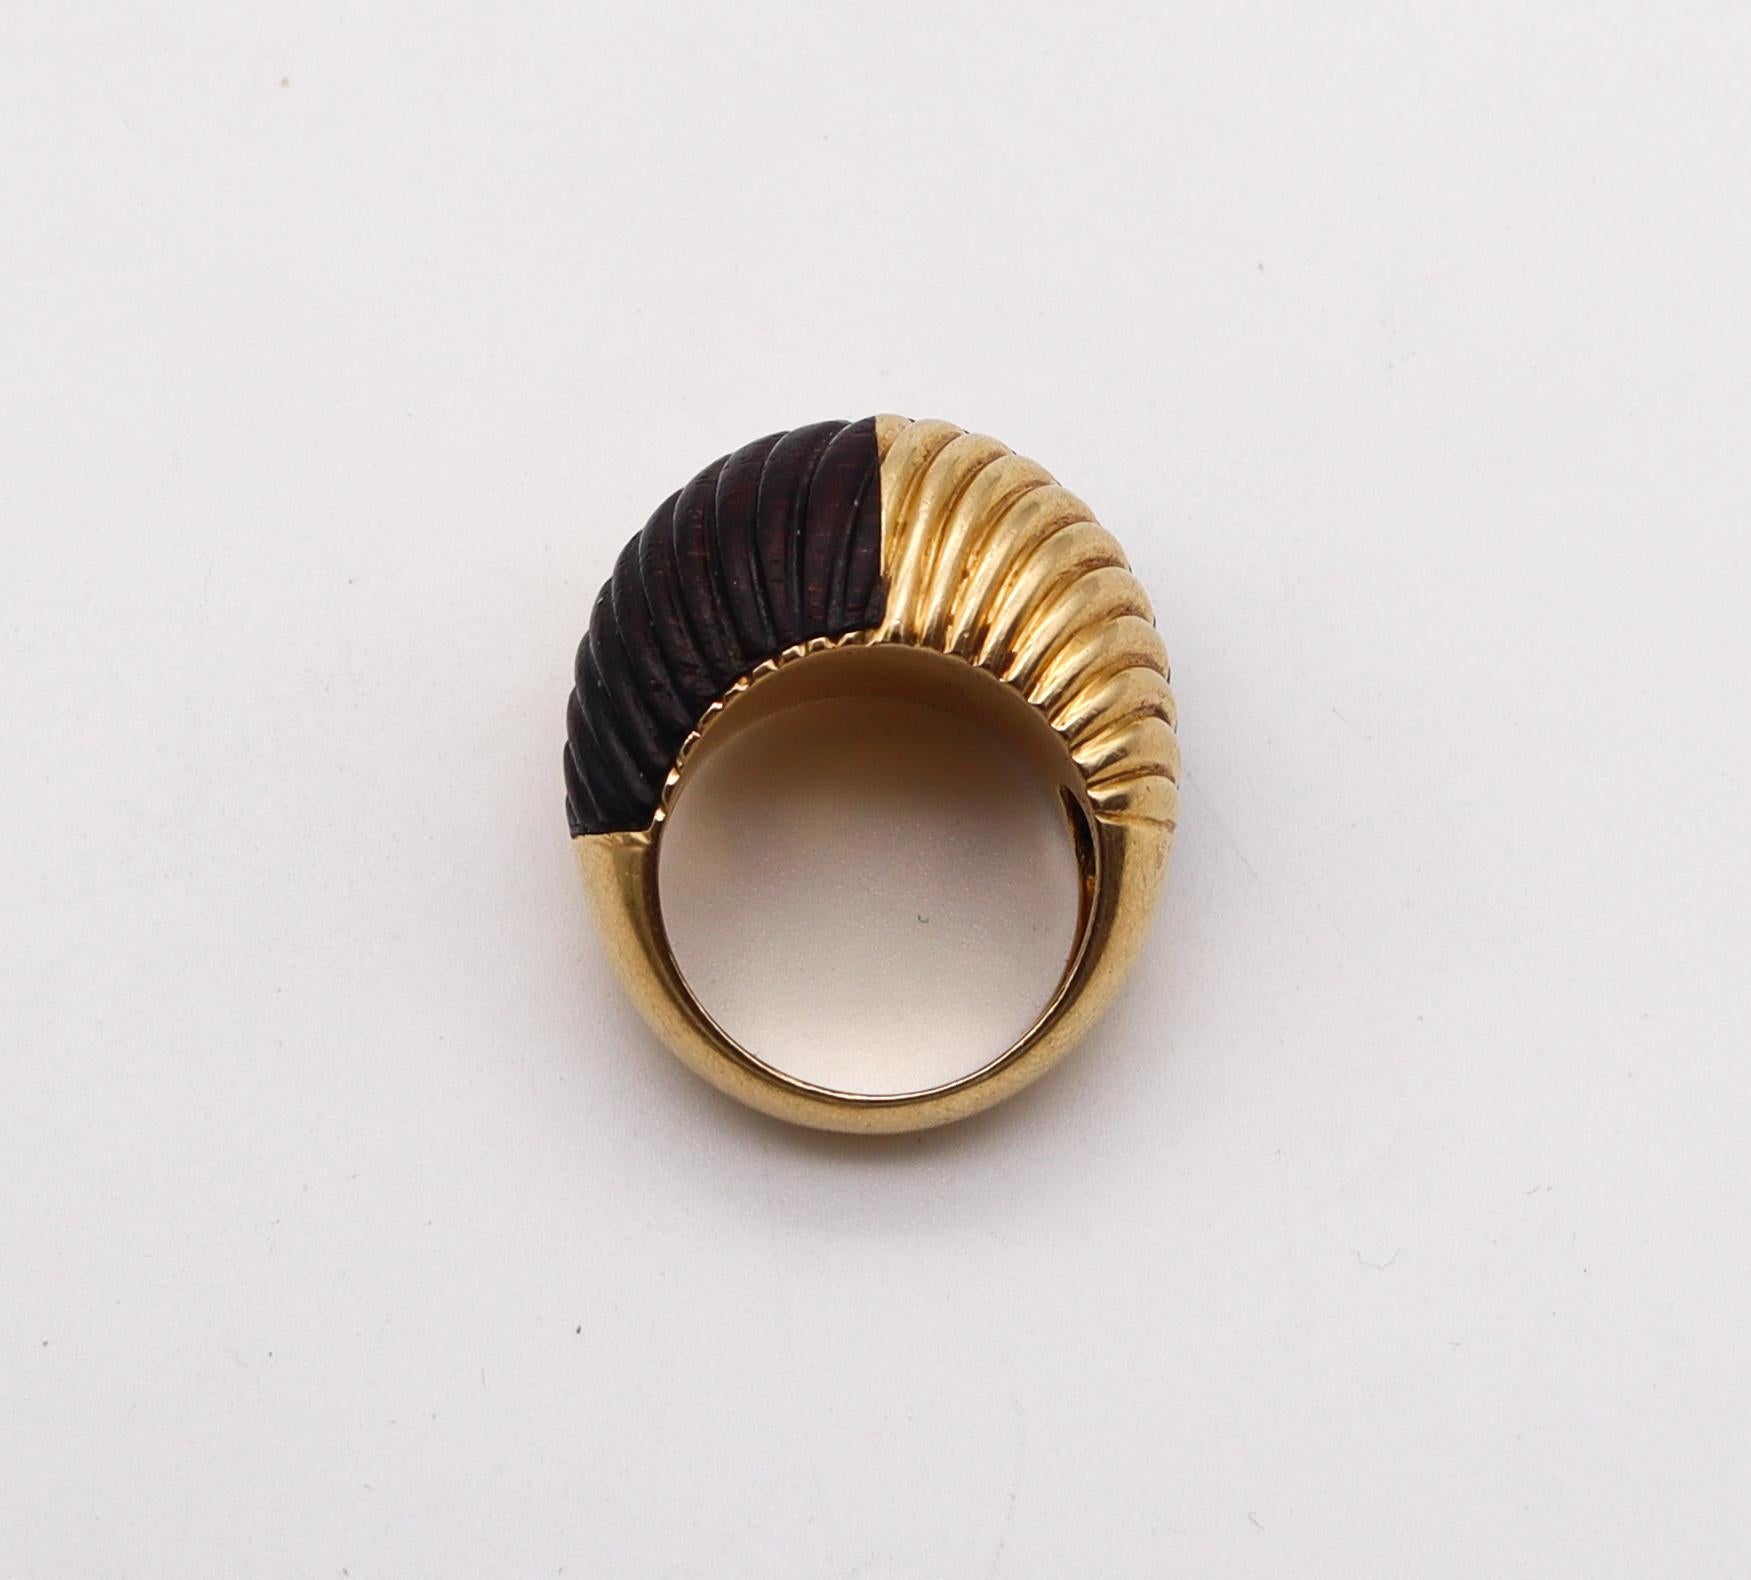 Van Cleef & Arpels 1970 Paris Bombe Wood Cocktail Ring in 18Kt Yellow Gold For Sale 2